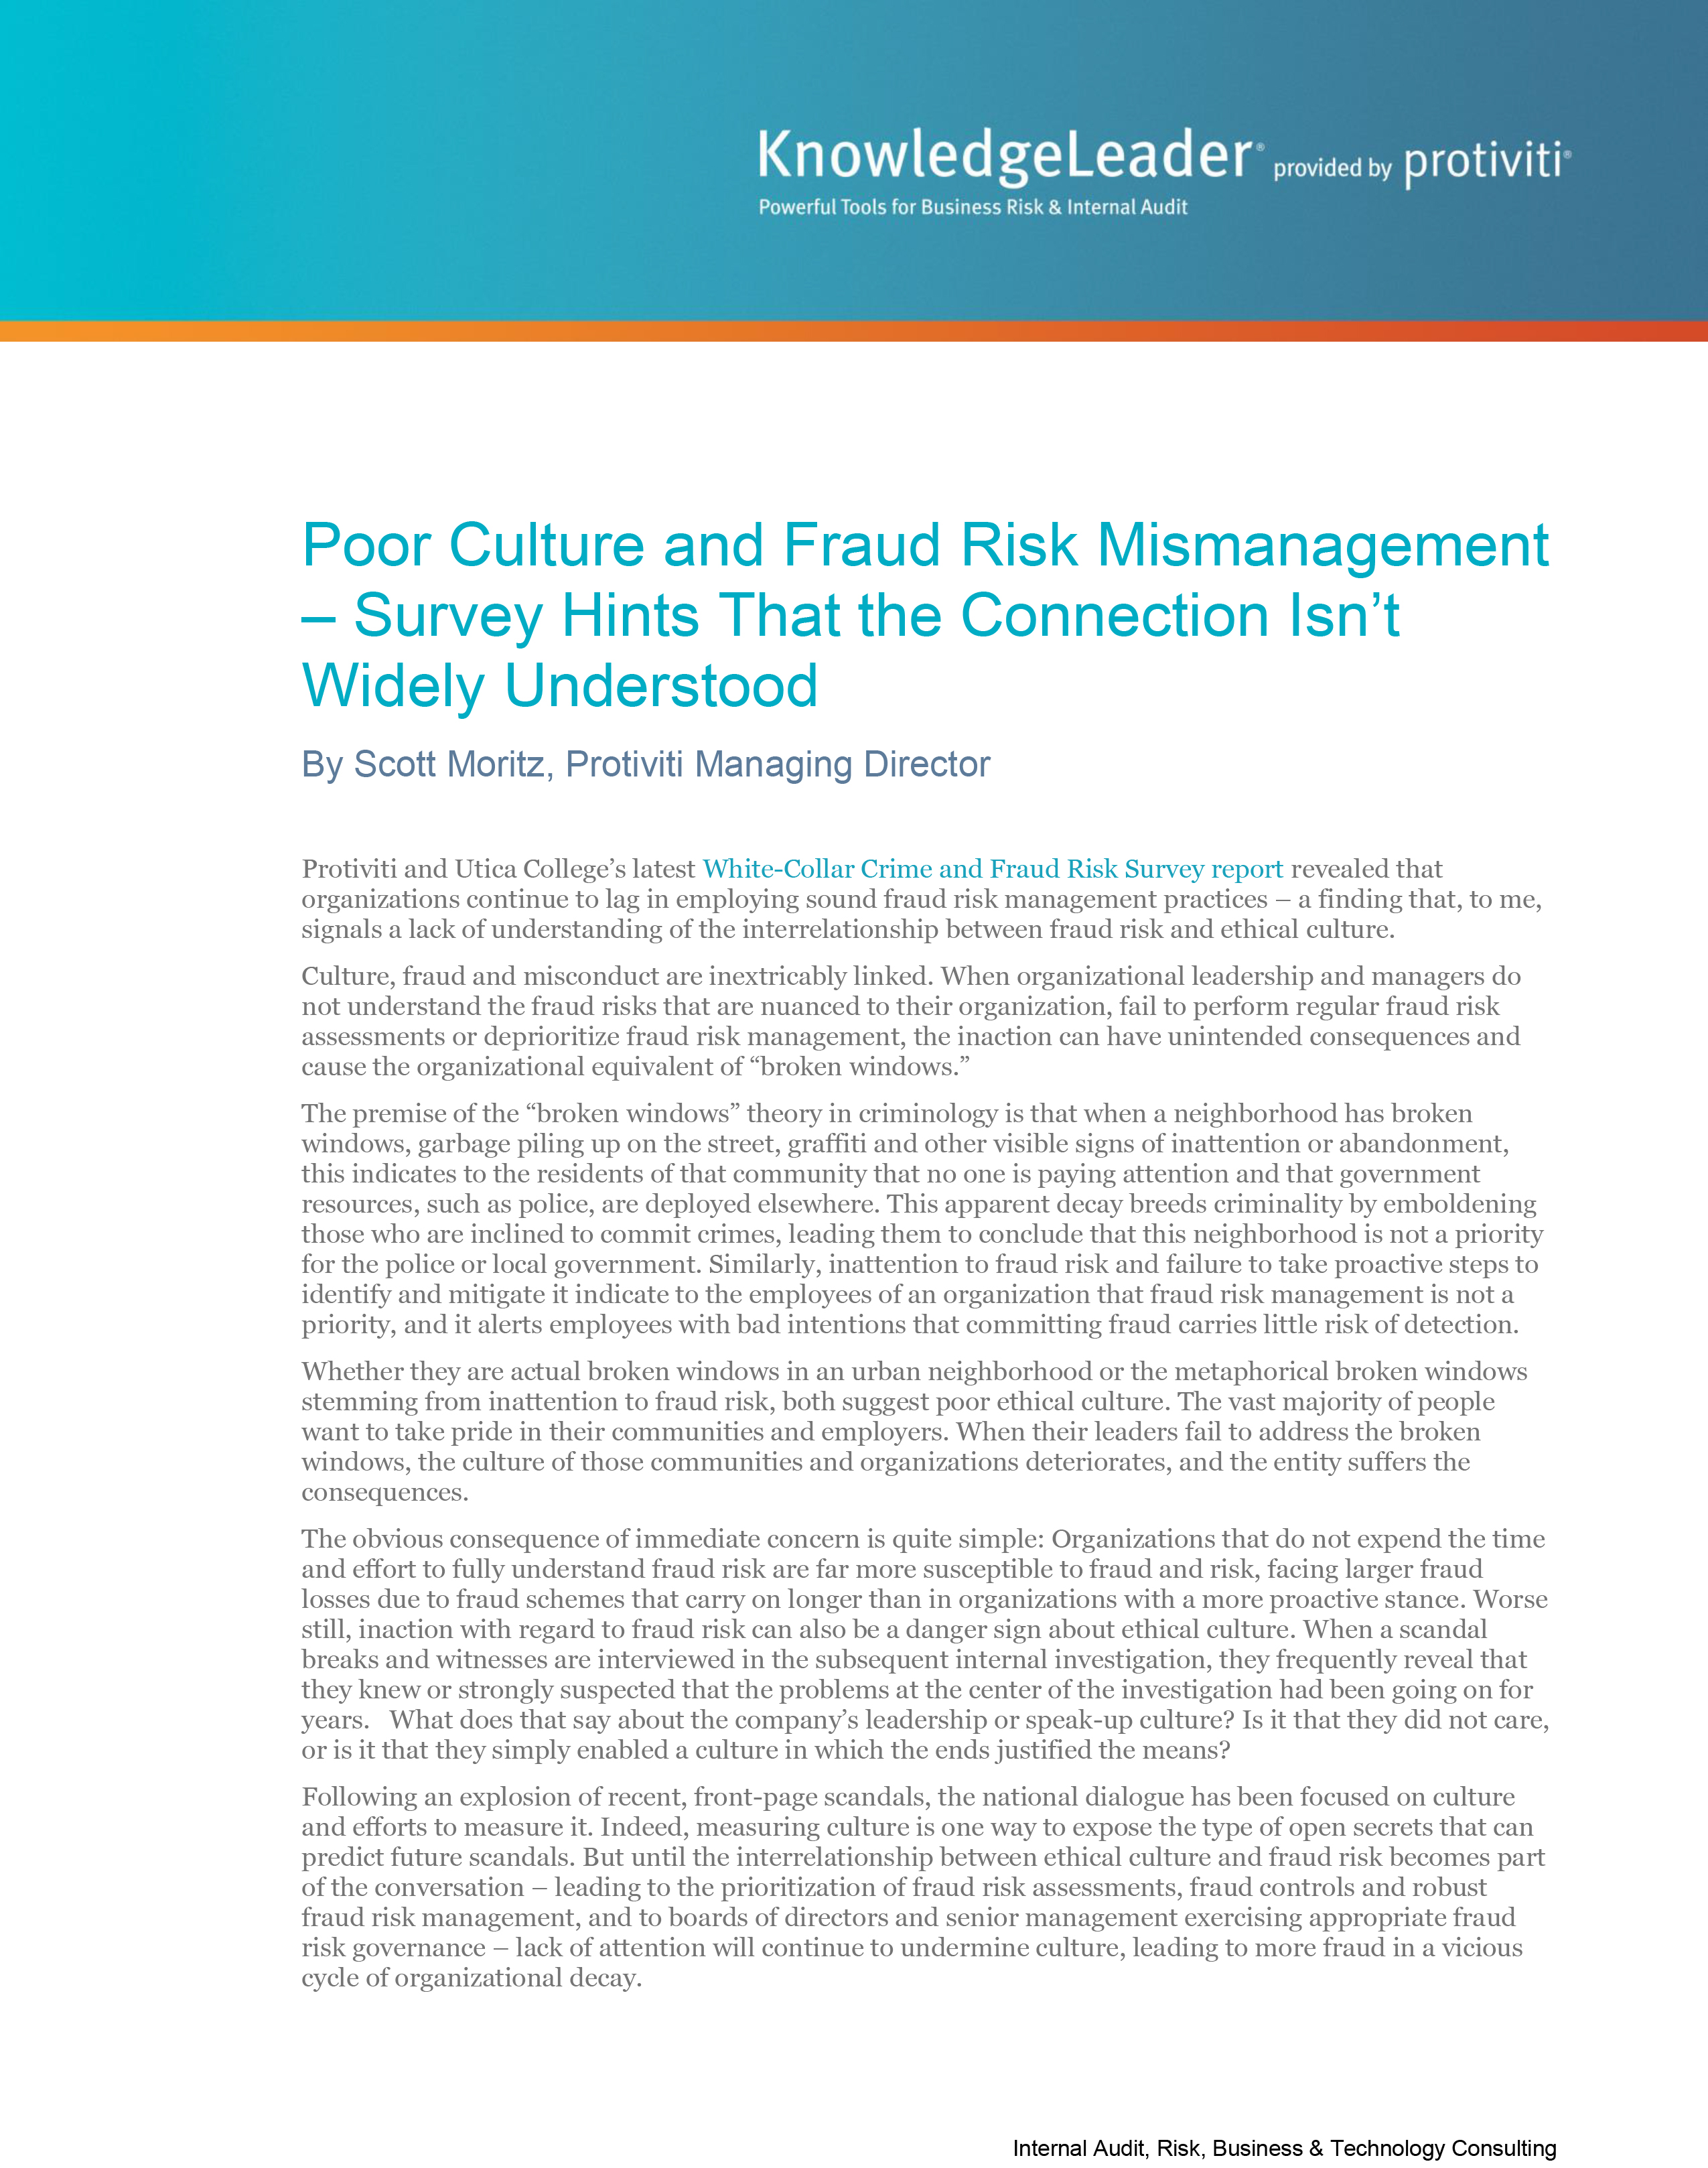 Screenshot of the first page of Poor Culture and Fraud Risk Mismanagement-Survey Hints That the Connection Isn’t Widely Understood